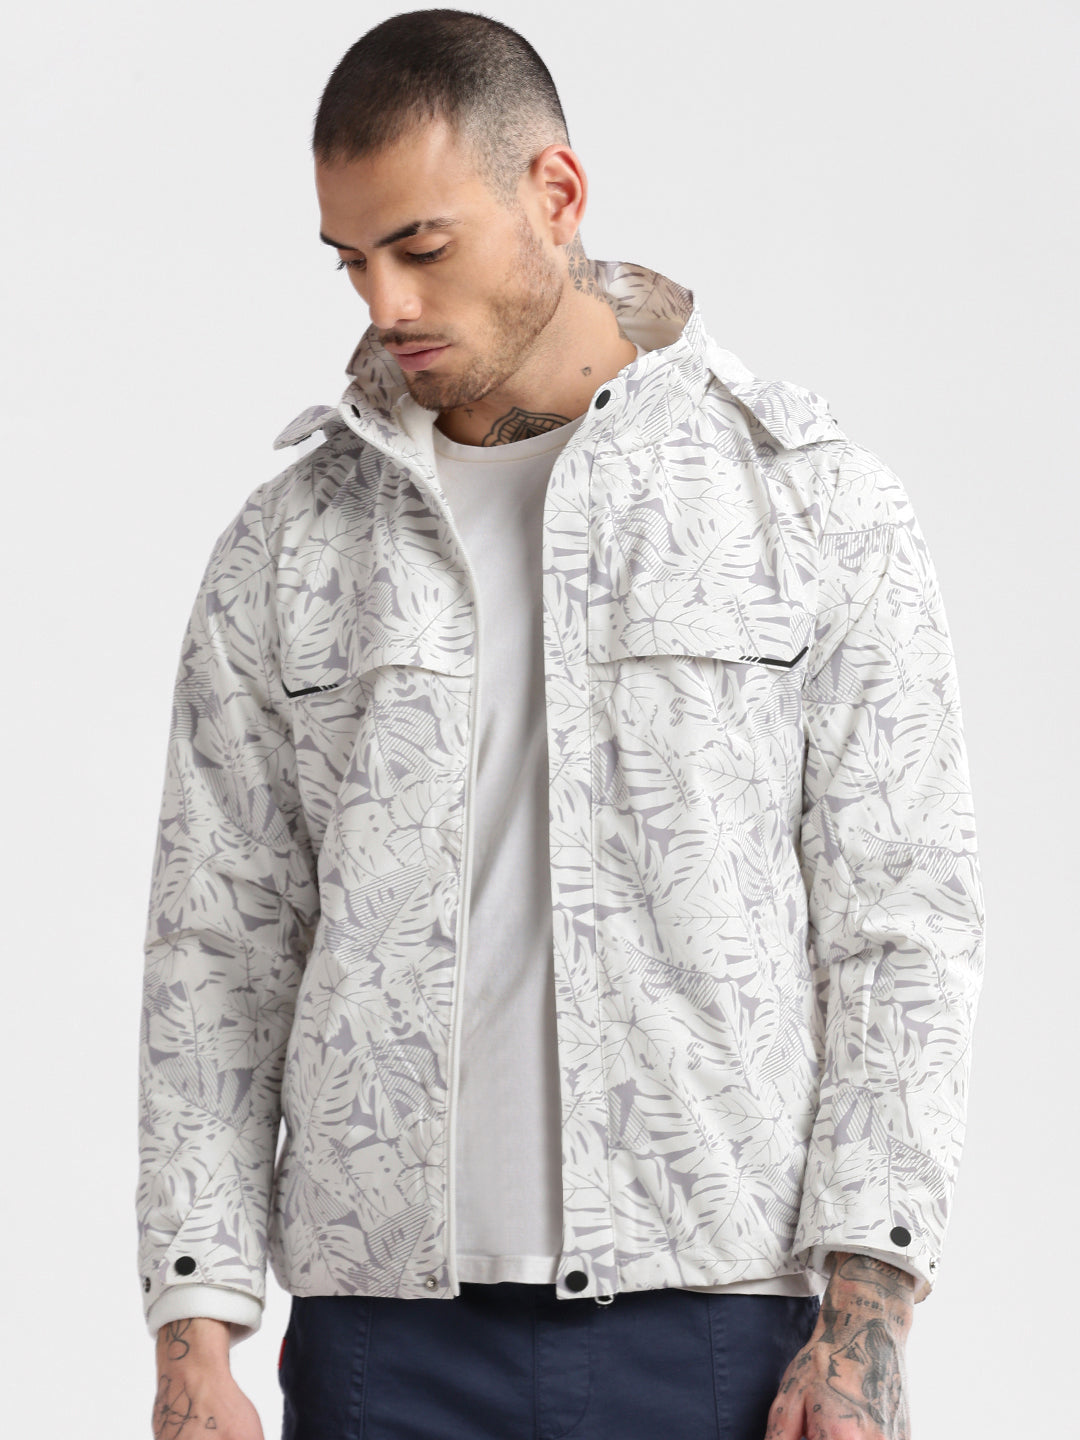 Men Hooded White Abstract Tailored Oversized Jacket comes with Detachable Hoodie and Inner fleece Jacket